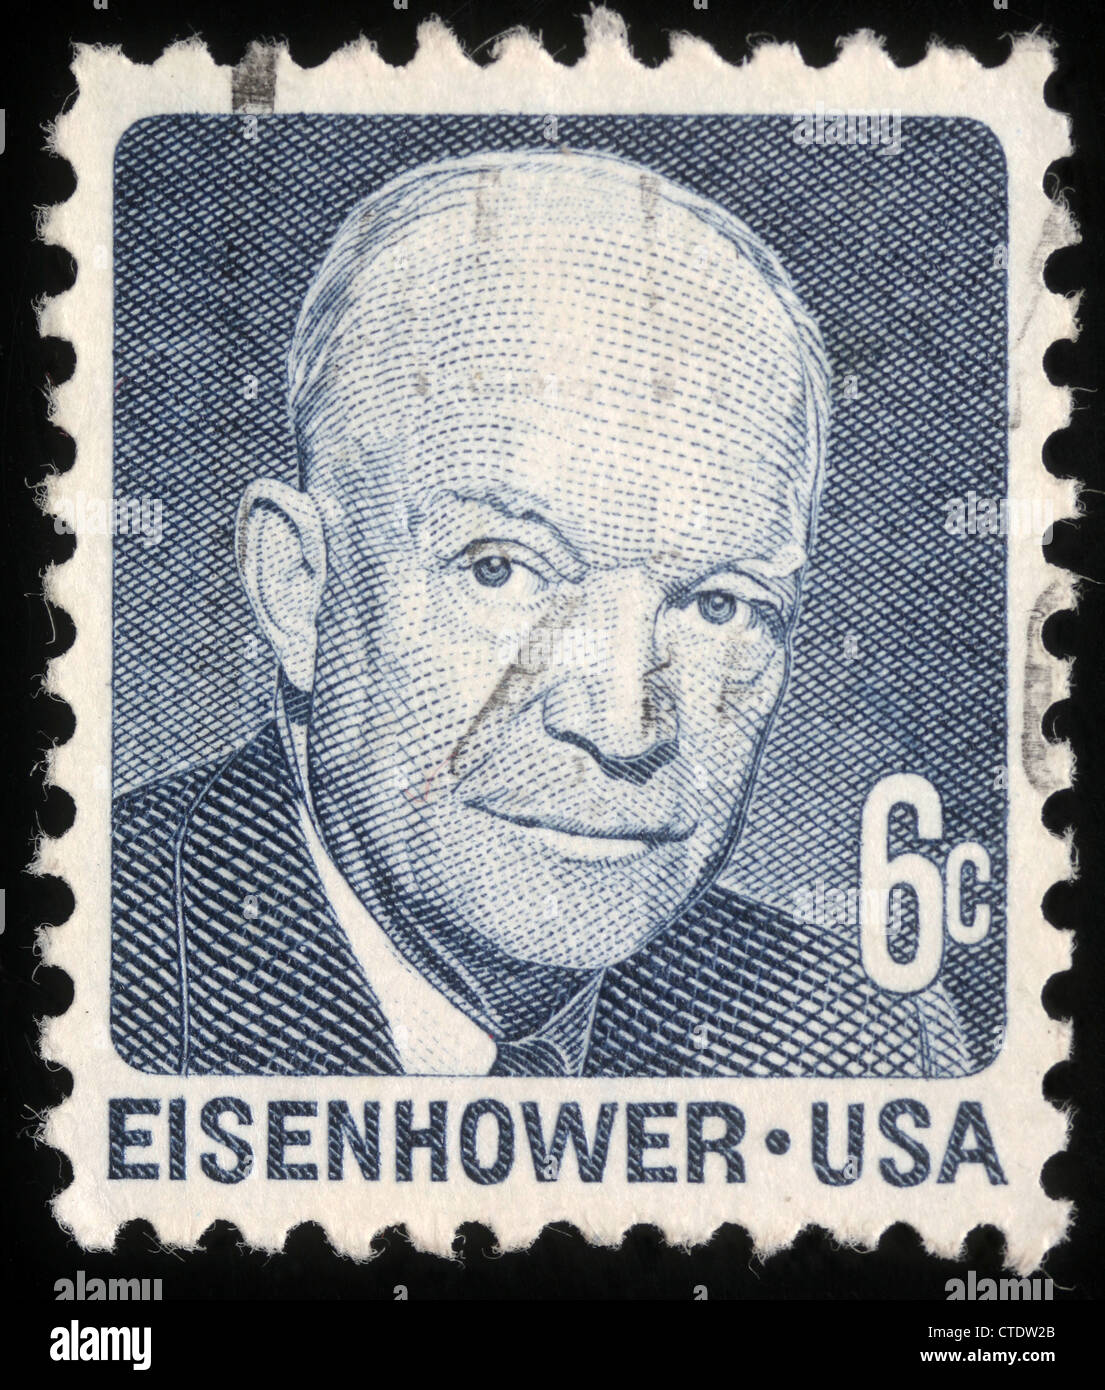 UNITED STATES OF AMERICA - CIRCA 1970: a stamp printed in the USA shows Dwight David Eisenhower, President of US, 1953-61. Stock Photo